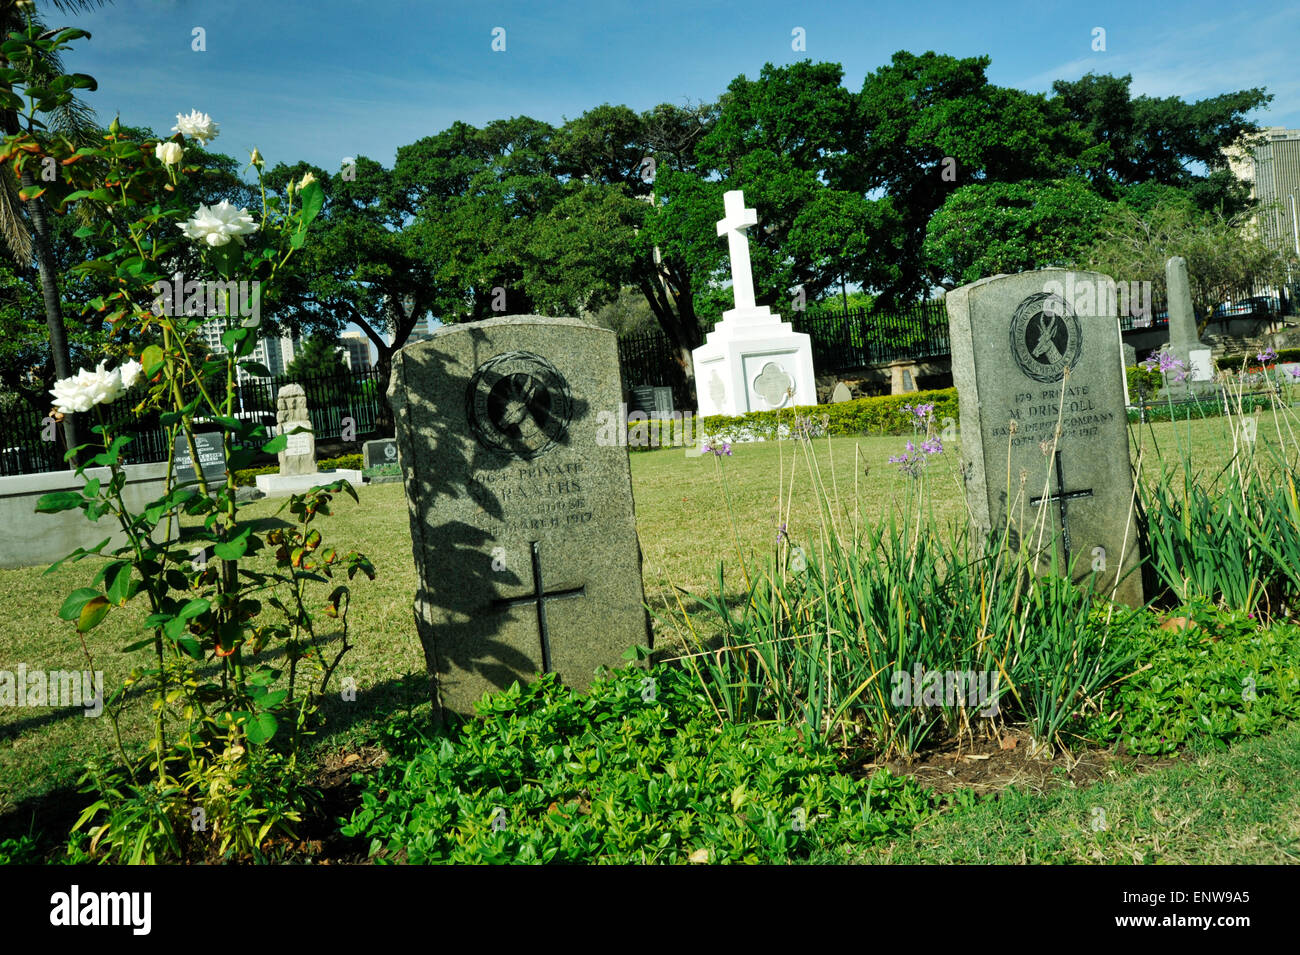 History, graves of British soldiers that died in Durban, South Africa, military service, wars, cemetery, memorial, remembrance, historical, travel Stock Photo